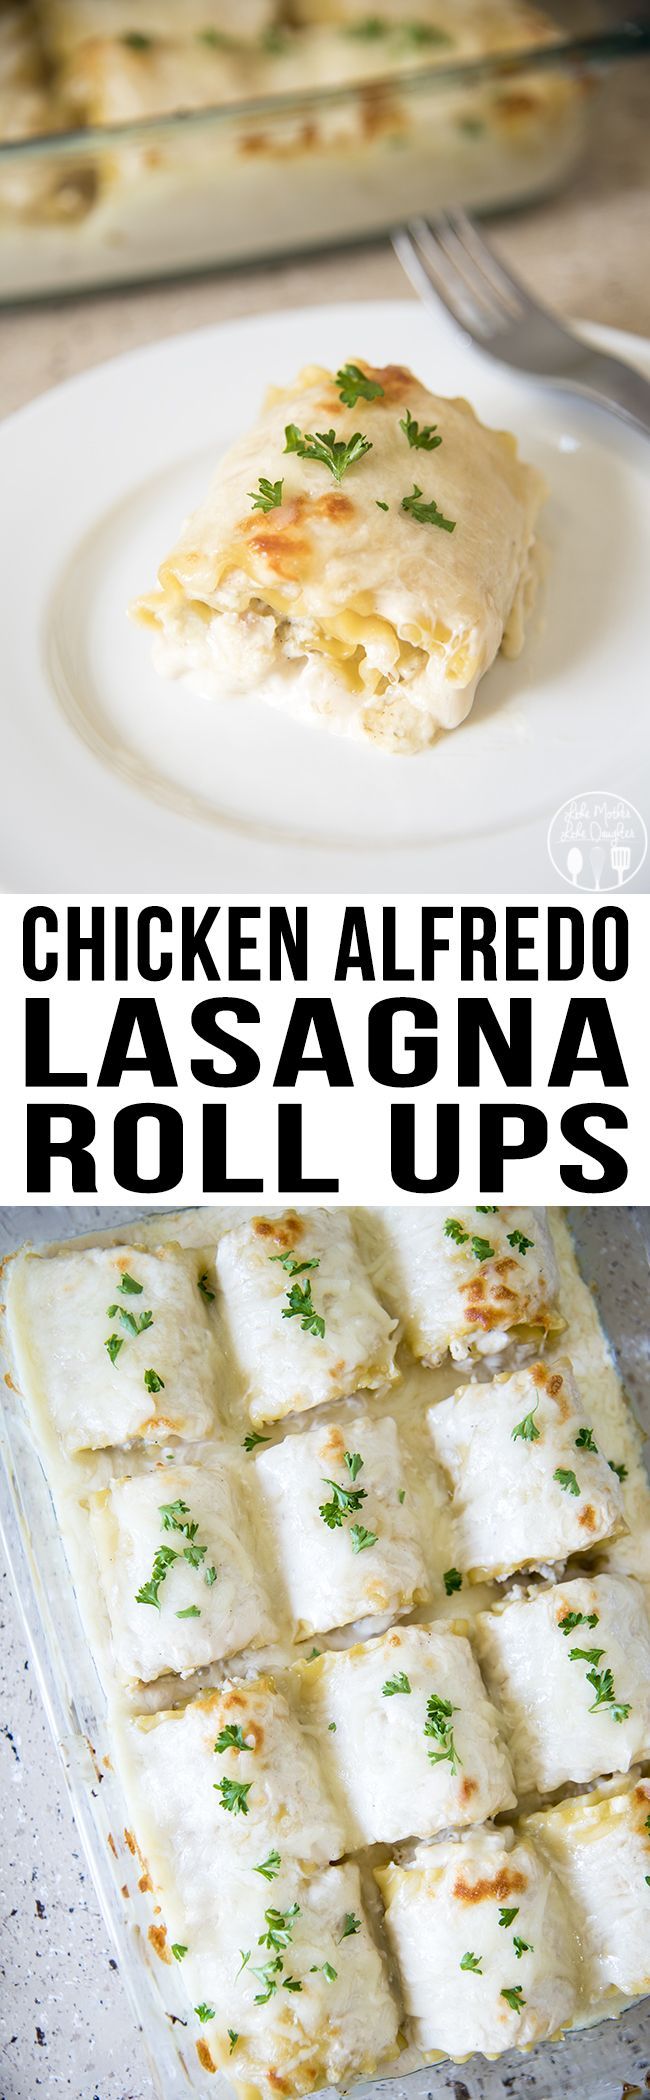 Chicken Alfredo Lasagna Roll Ups – These delicious lasagna roll ups are ready in 30 minutes for an easy weeknight meal that your